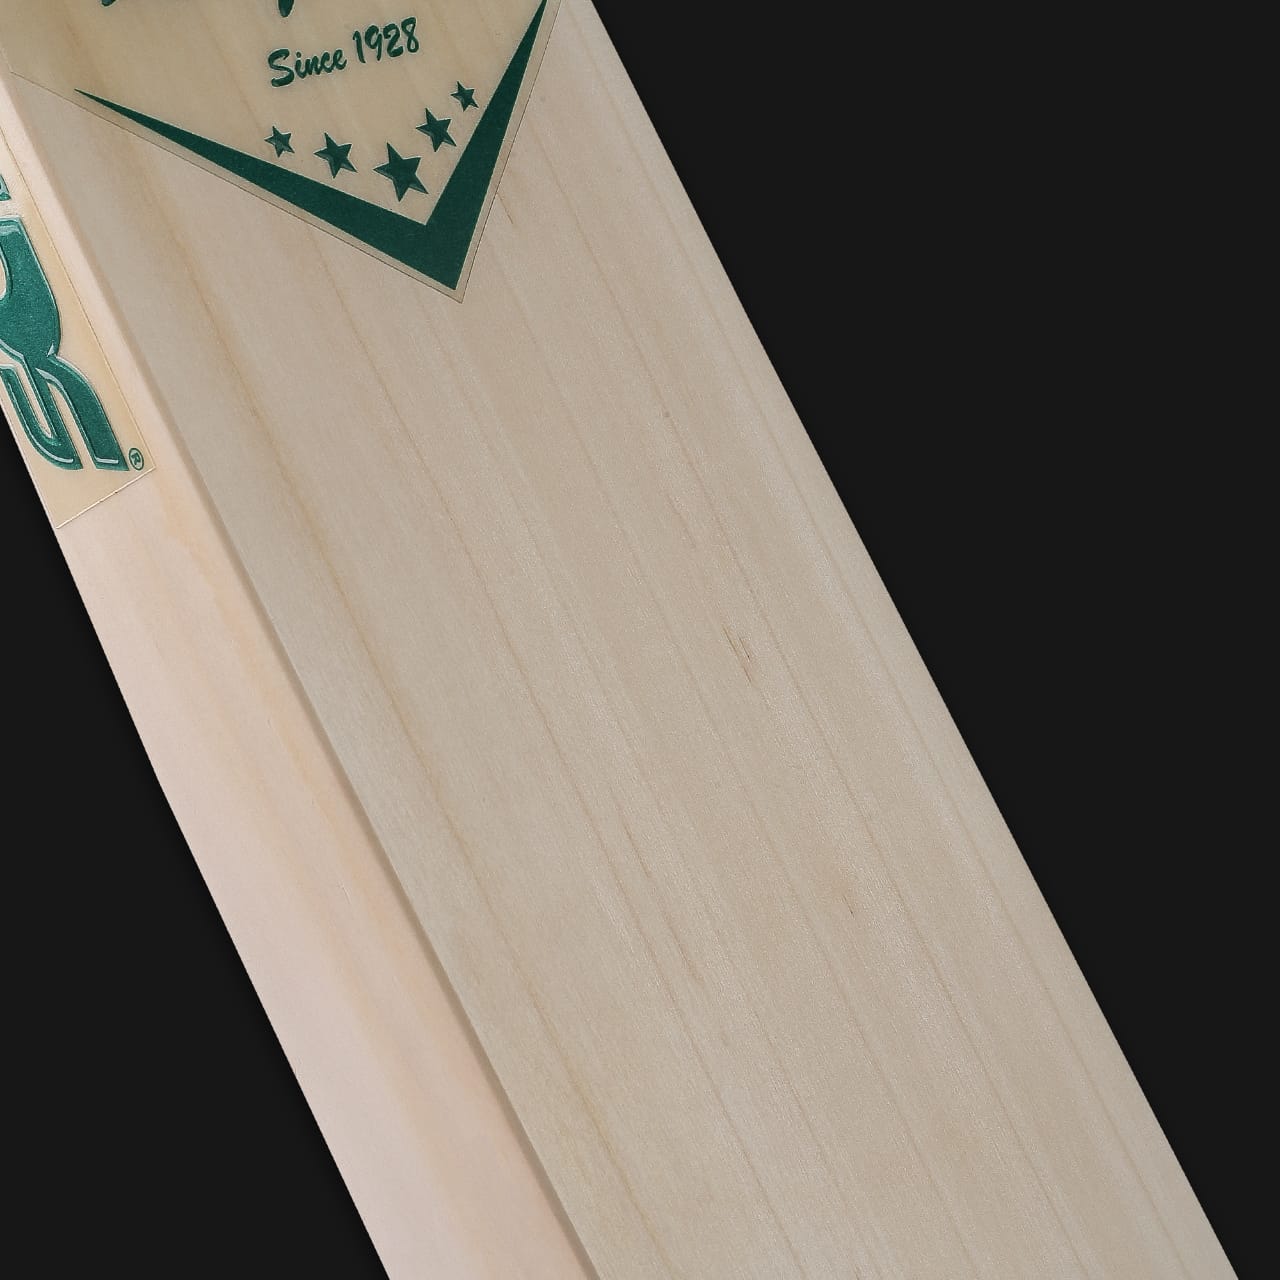 MIDS Legacy 5 Star Grade 1 English Willow Cricket Bat 2.6 Lbs Red Handle Grip